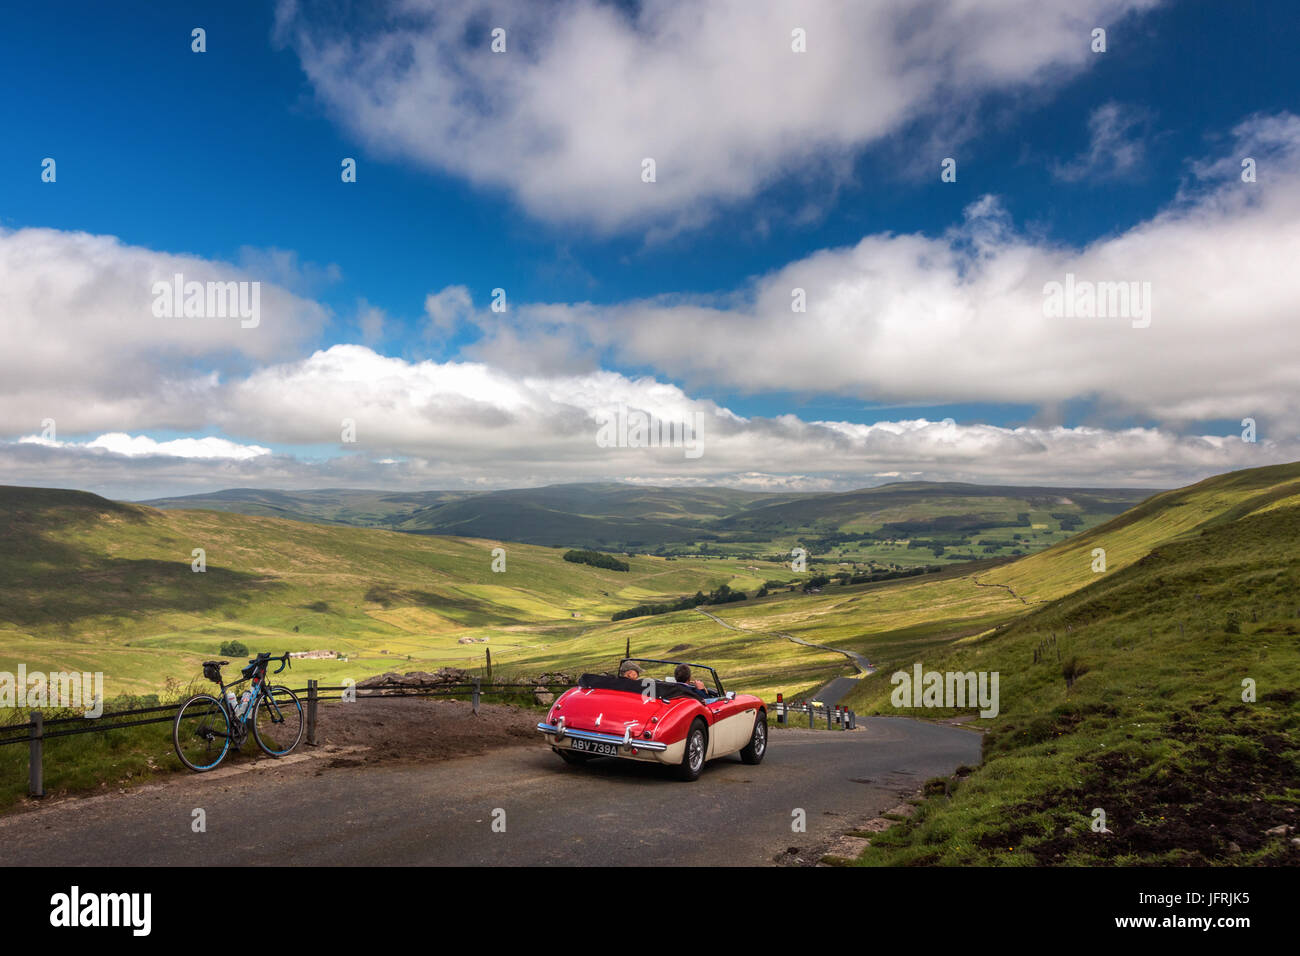 Views from top of Fleet Moss with road bike & red Austin Healey 3000 car - famous cycling hill climb & countryside drive, Hawes, Yorkshire Dales, UK Stock Photo